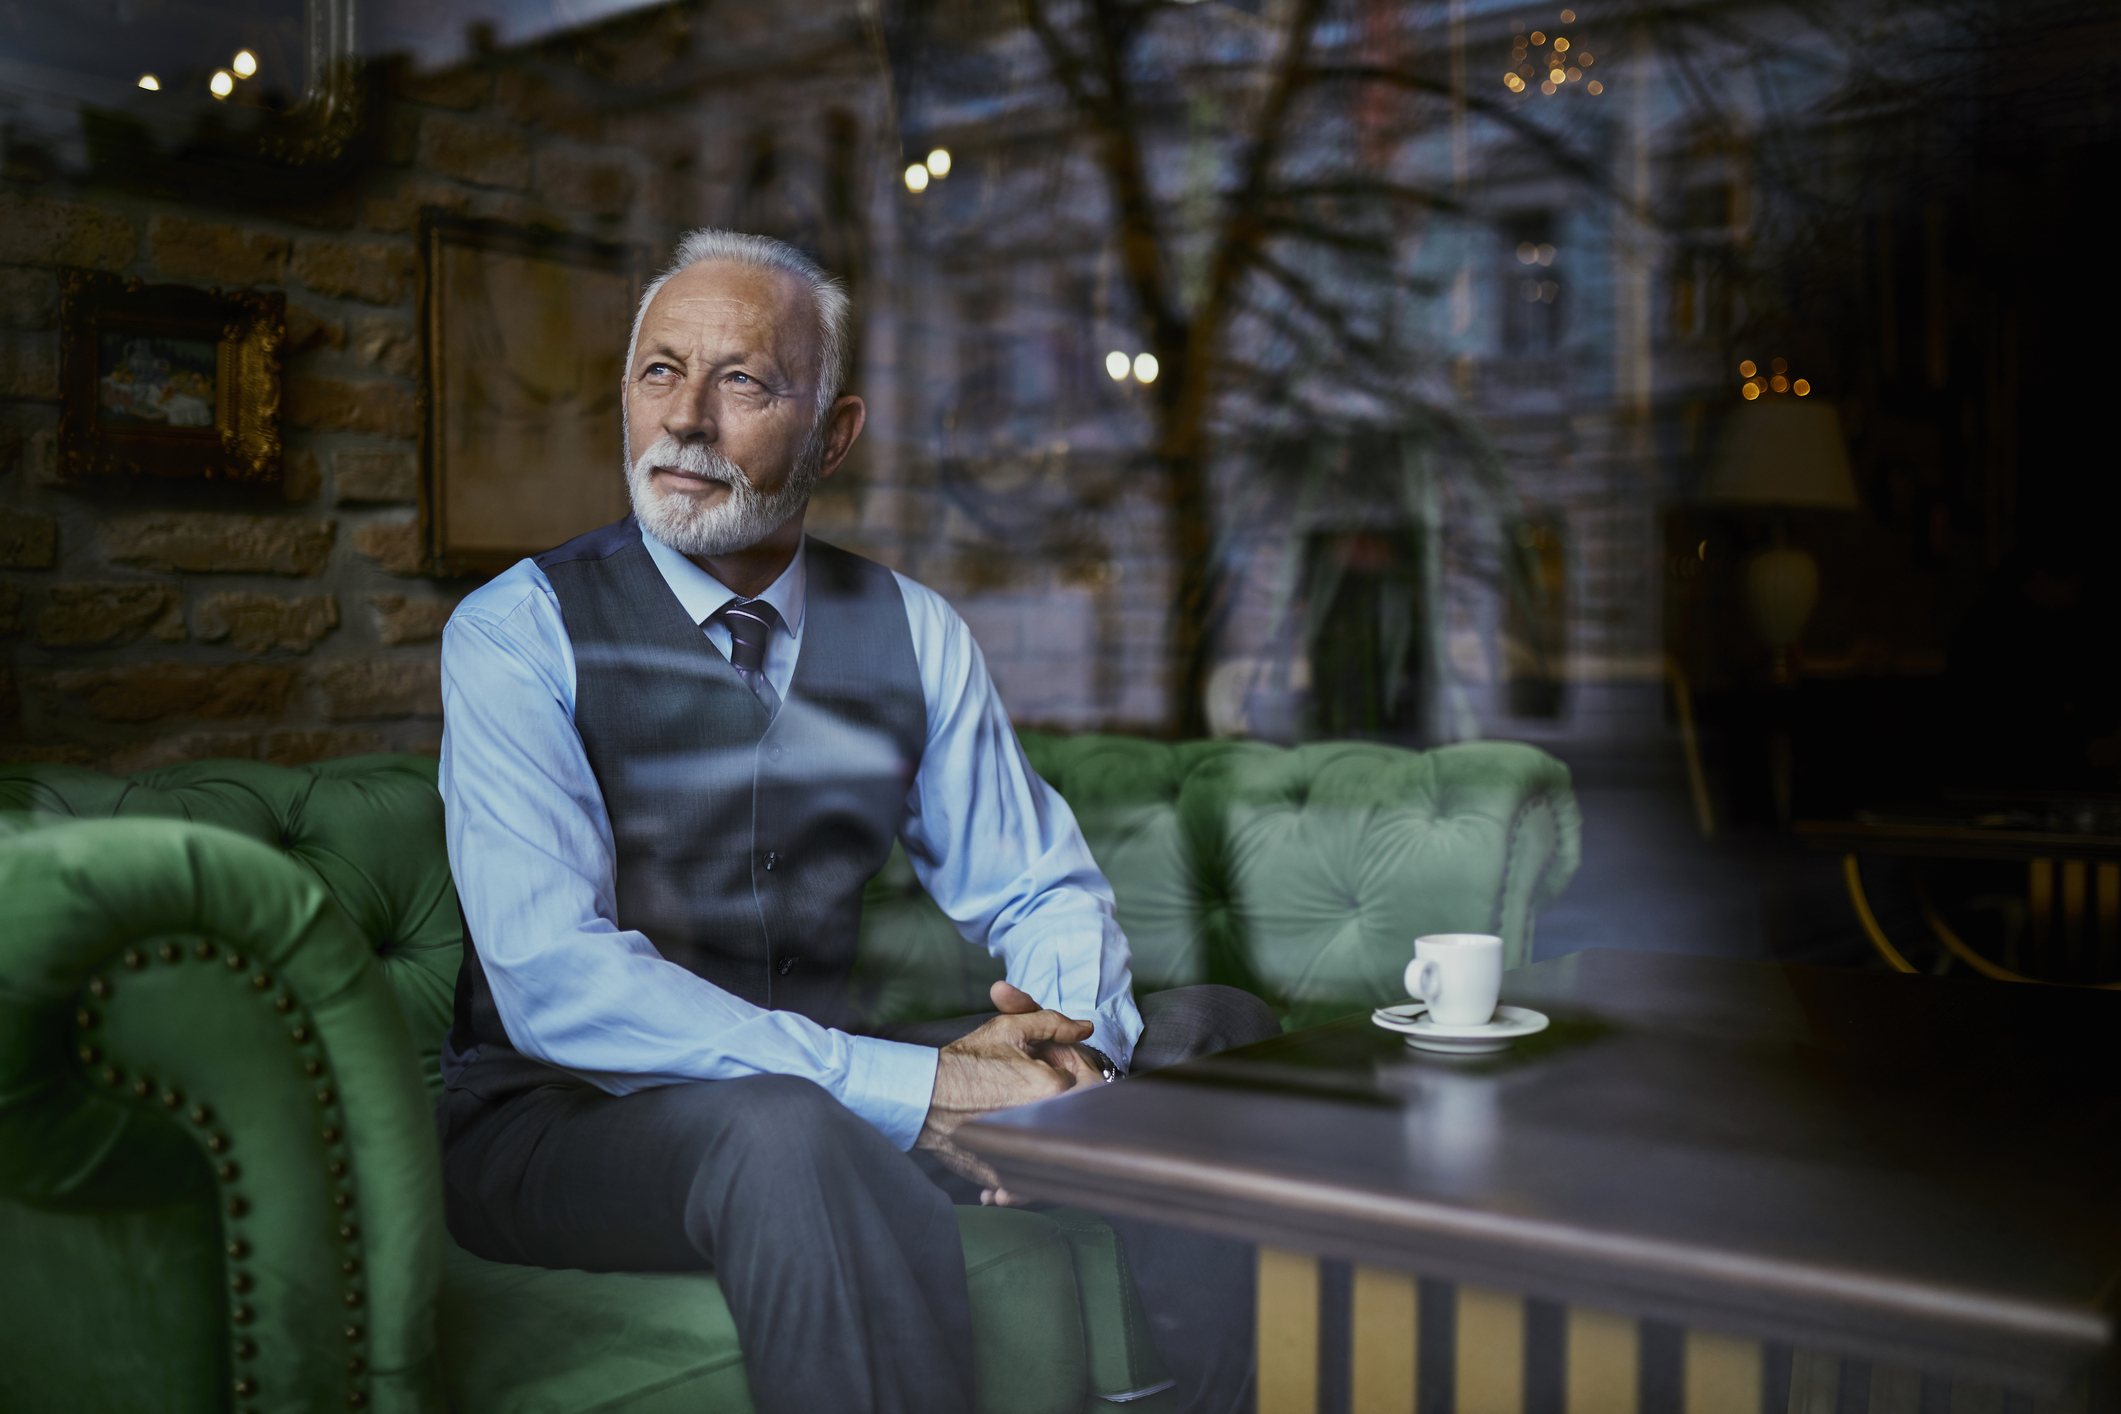 Elegant senior man sitting on couch in a cafe looking out of window